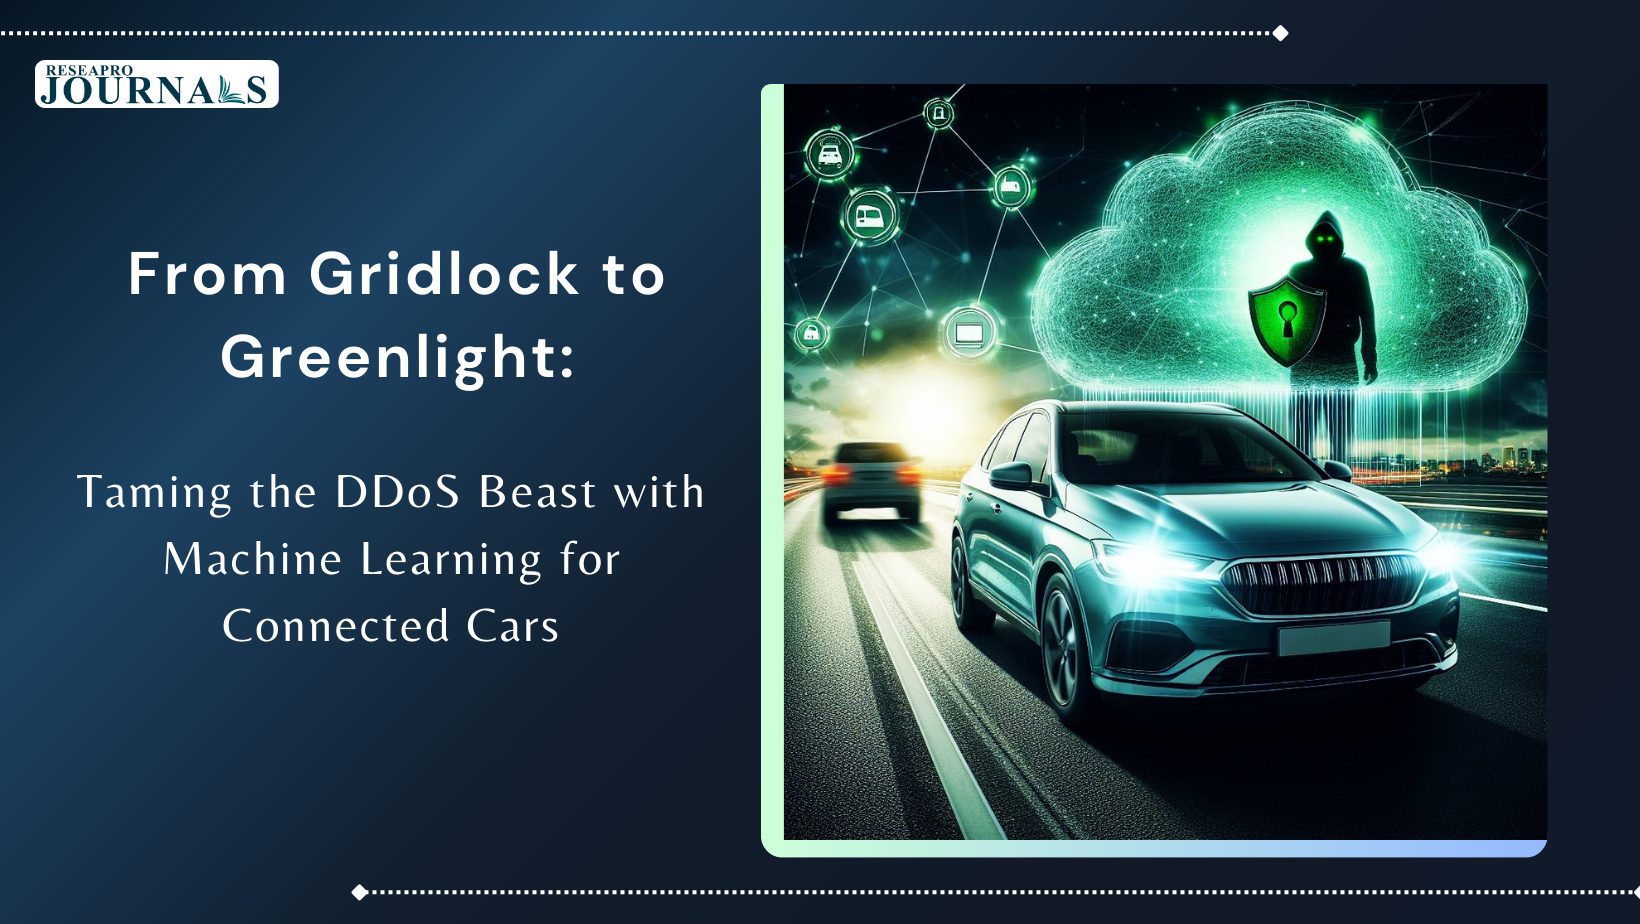 From Gridlock to Greenlight: Taming the DDoS Beast with Machine Learning for Connected Cars